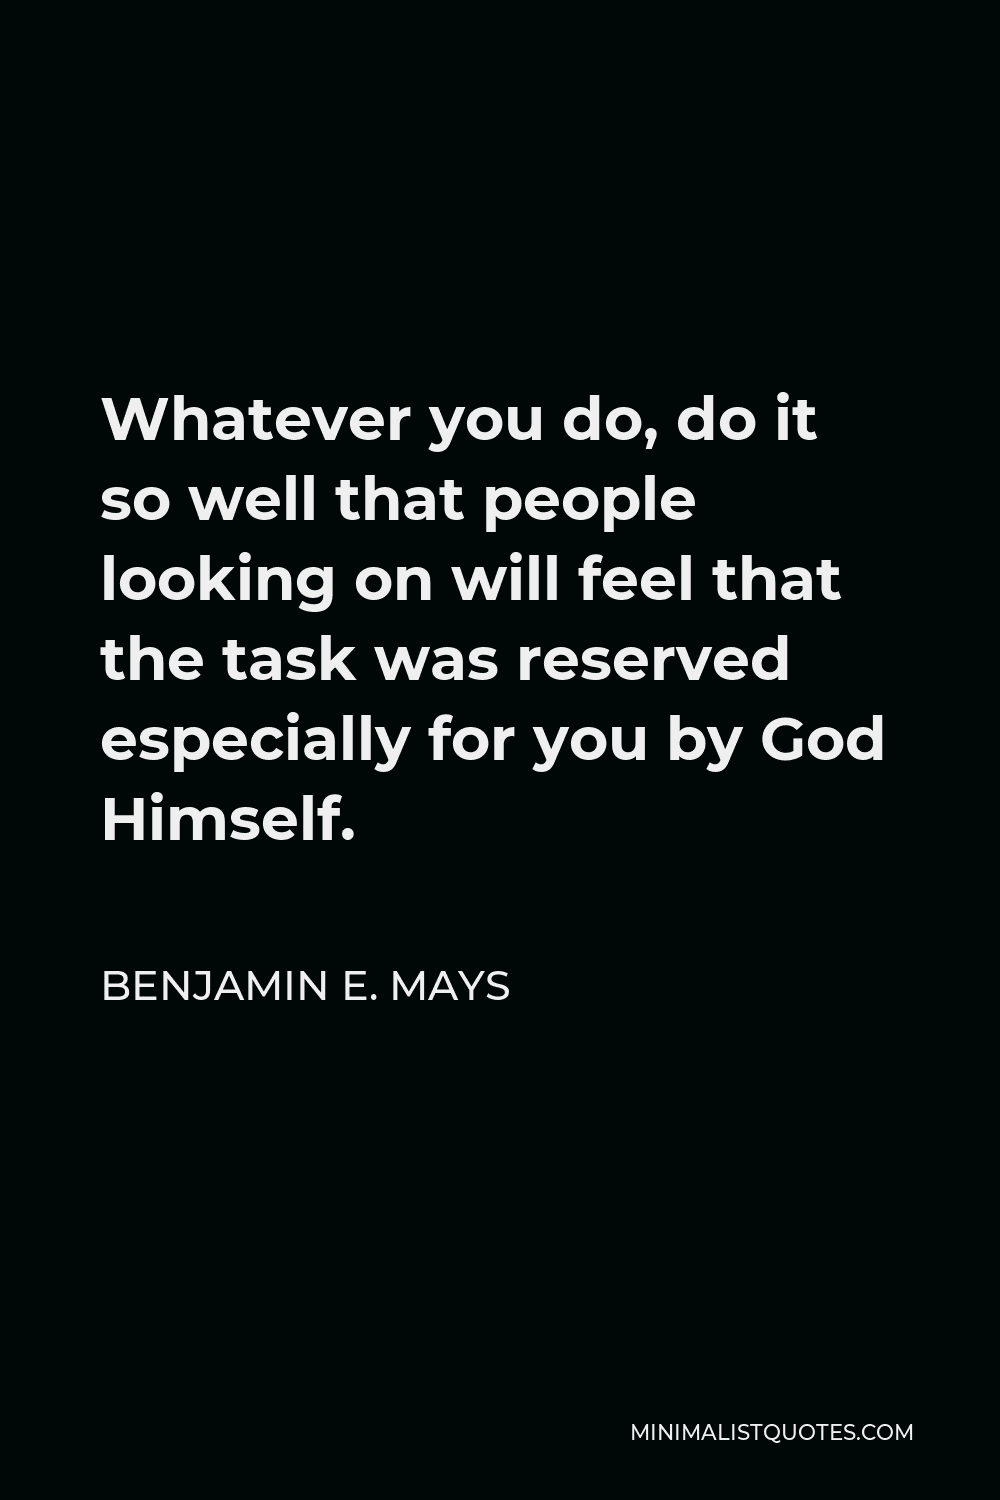 Benjamin E. Mays Quote - Whatever you do, do it so well that people looking on will feel that the task was reserved especially for you by God Himself.